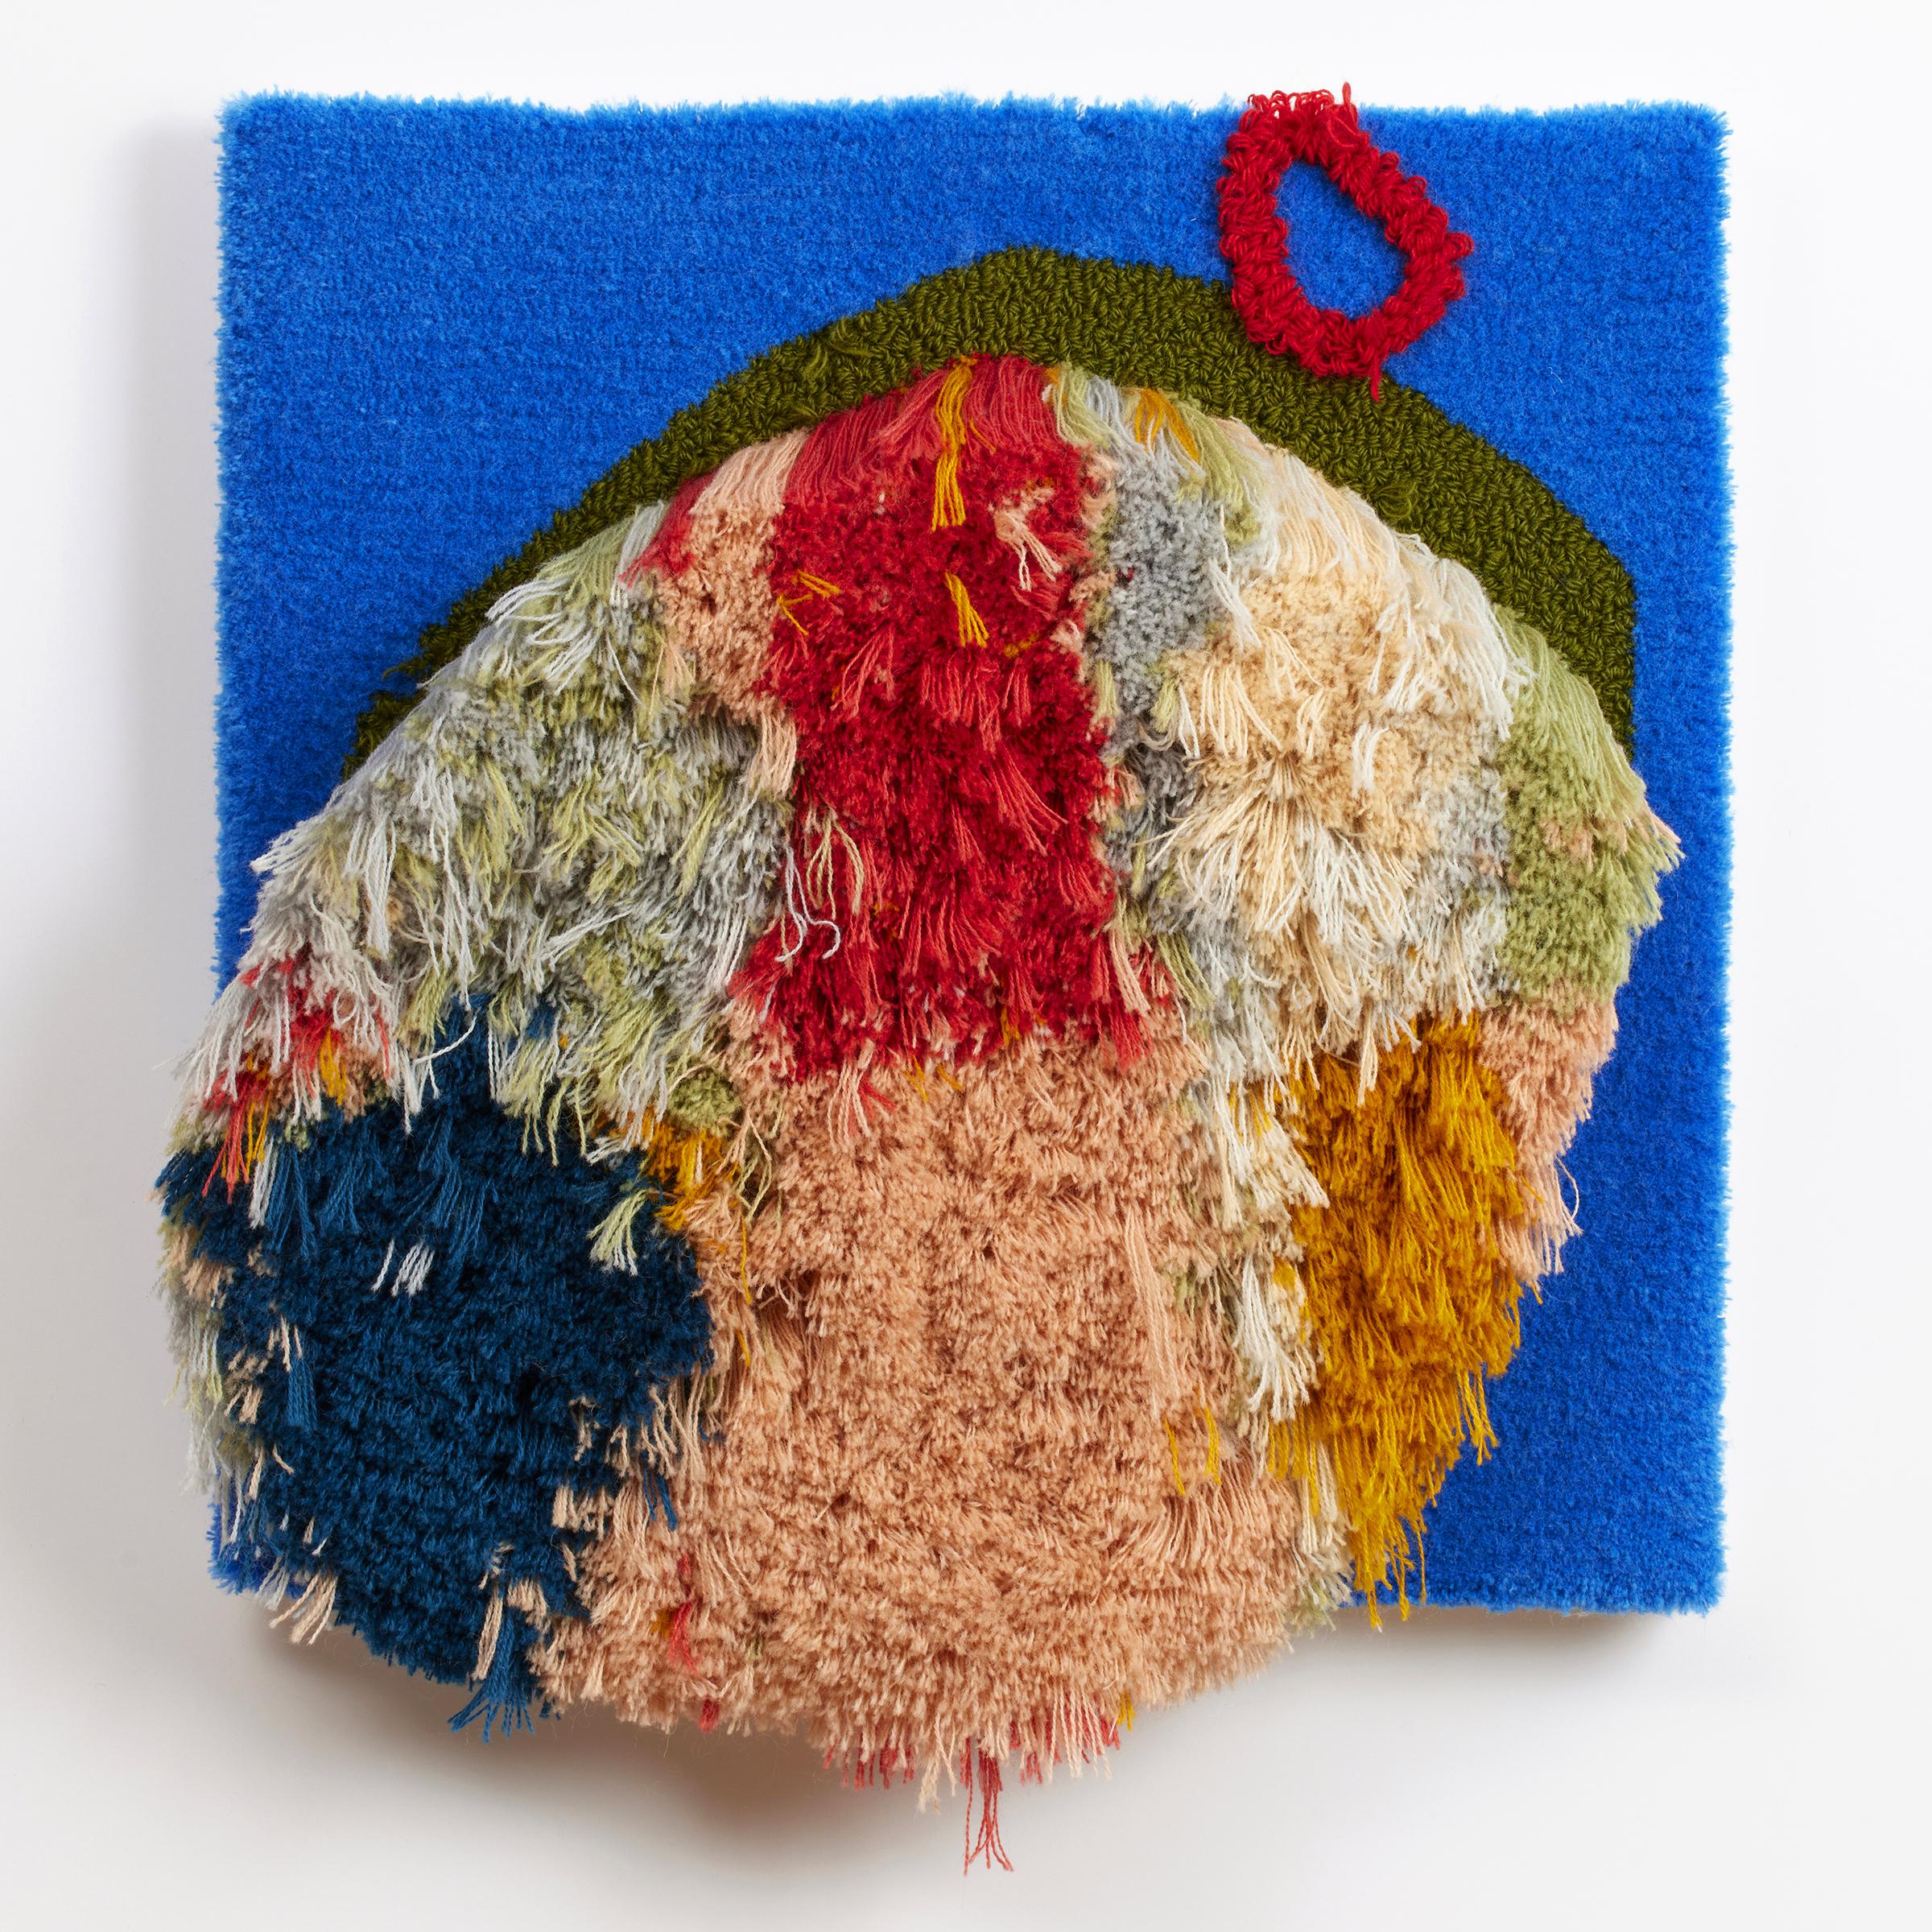 Trish Andersen Abstract Sculpture - 'Jelly Roll' - contemporary fiber art, texture, pattern, blue, tufting